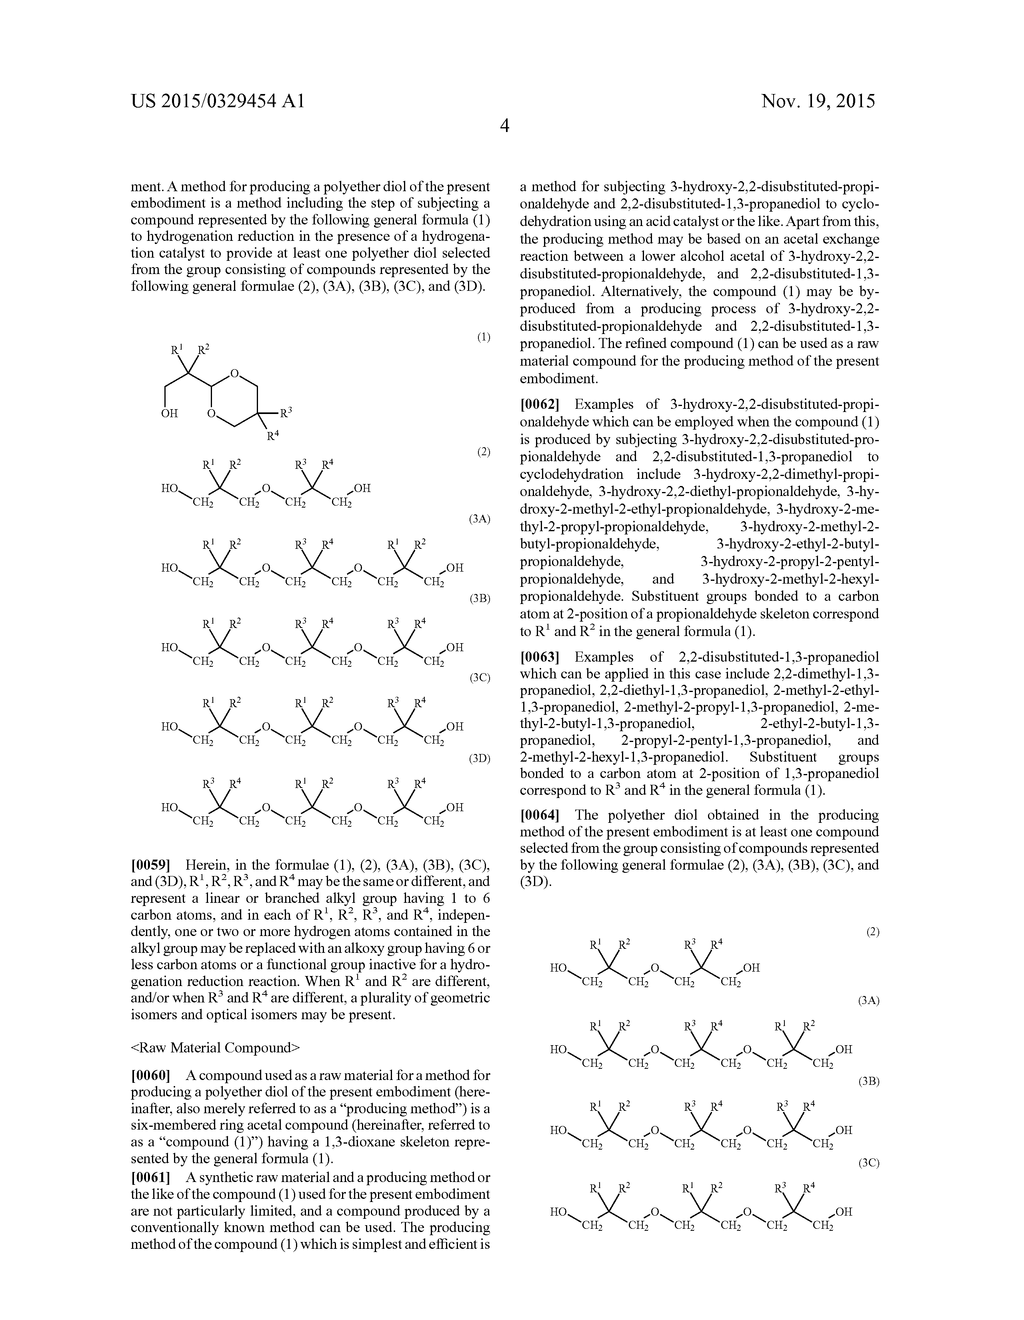 POLYETHER DIOL AND METHOD FOR PRODUCING THE SAME - diagram, schematic, and image 16